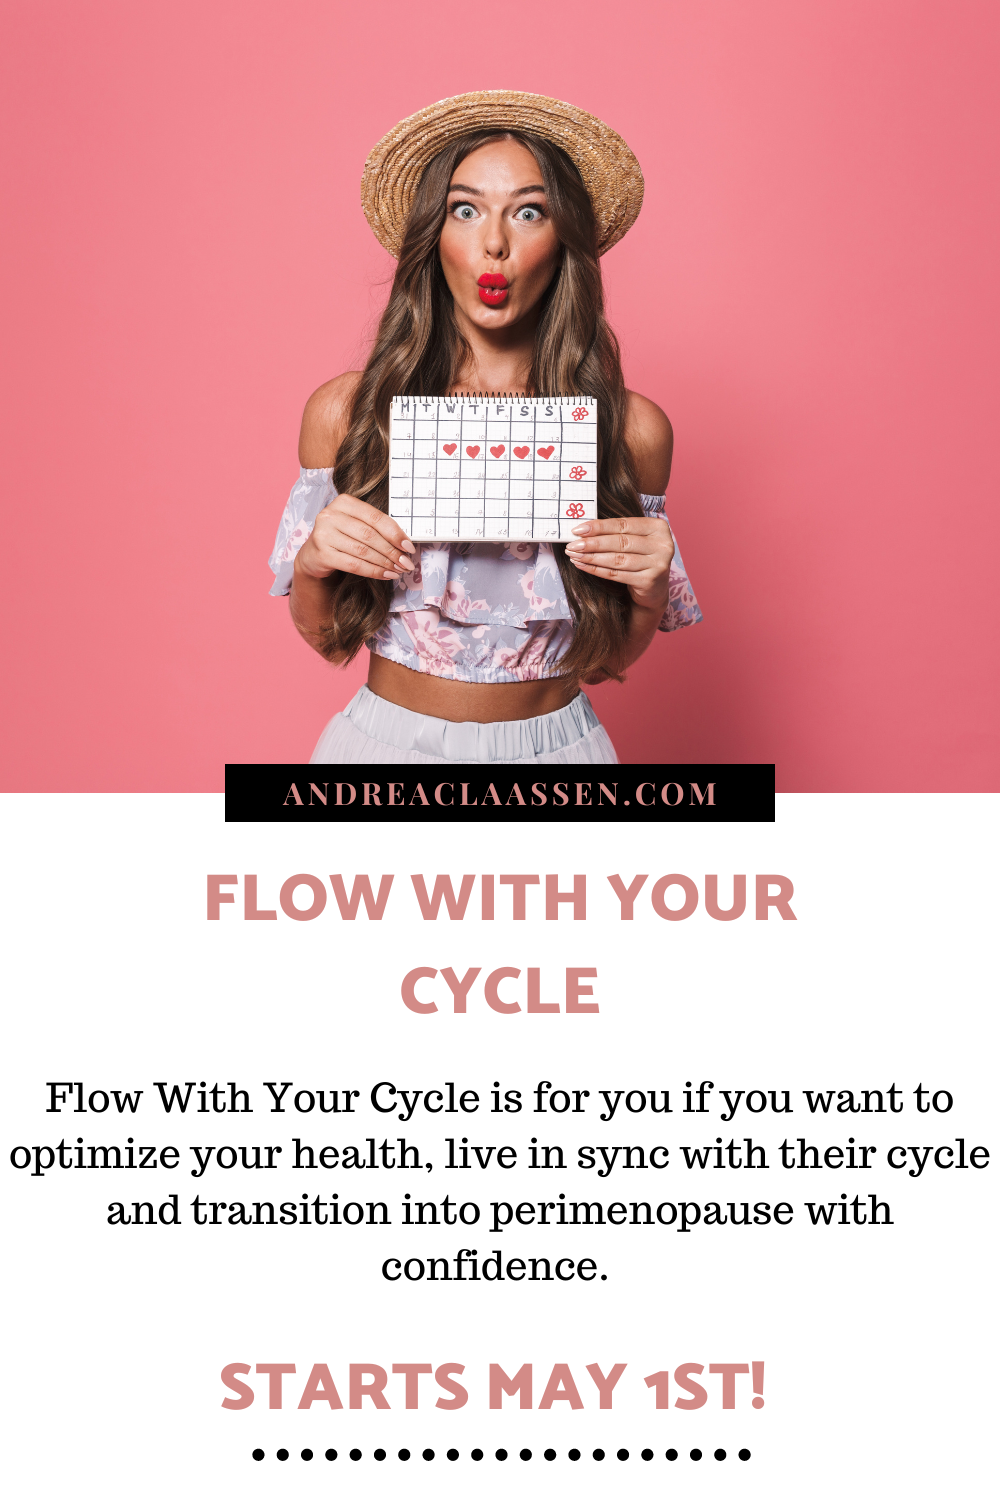 Copy of Flow with your cycle